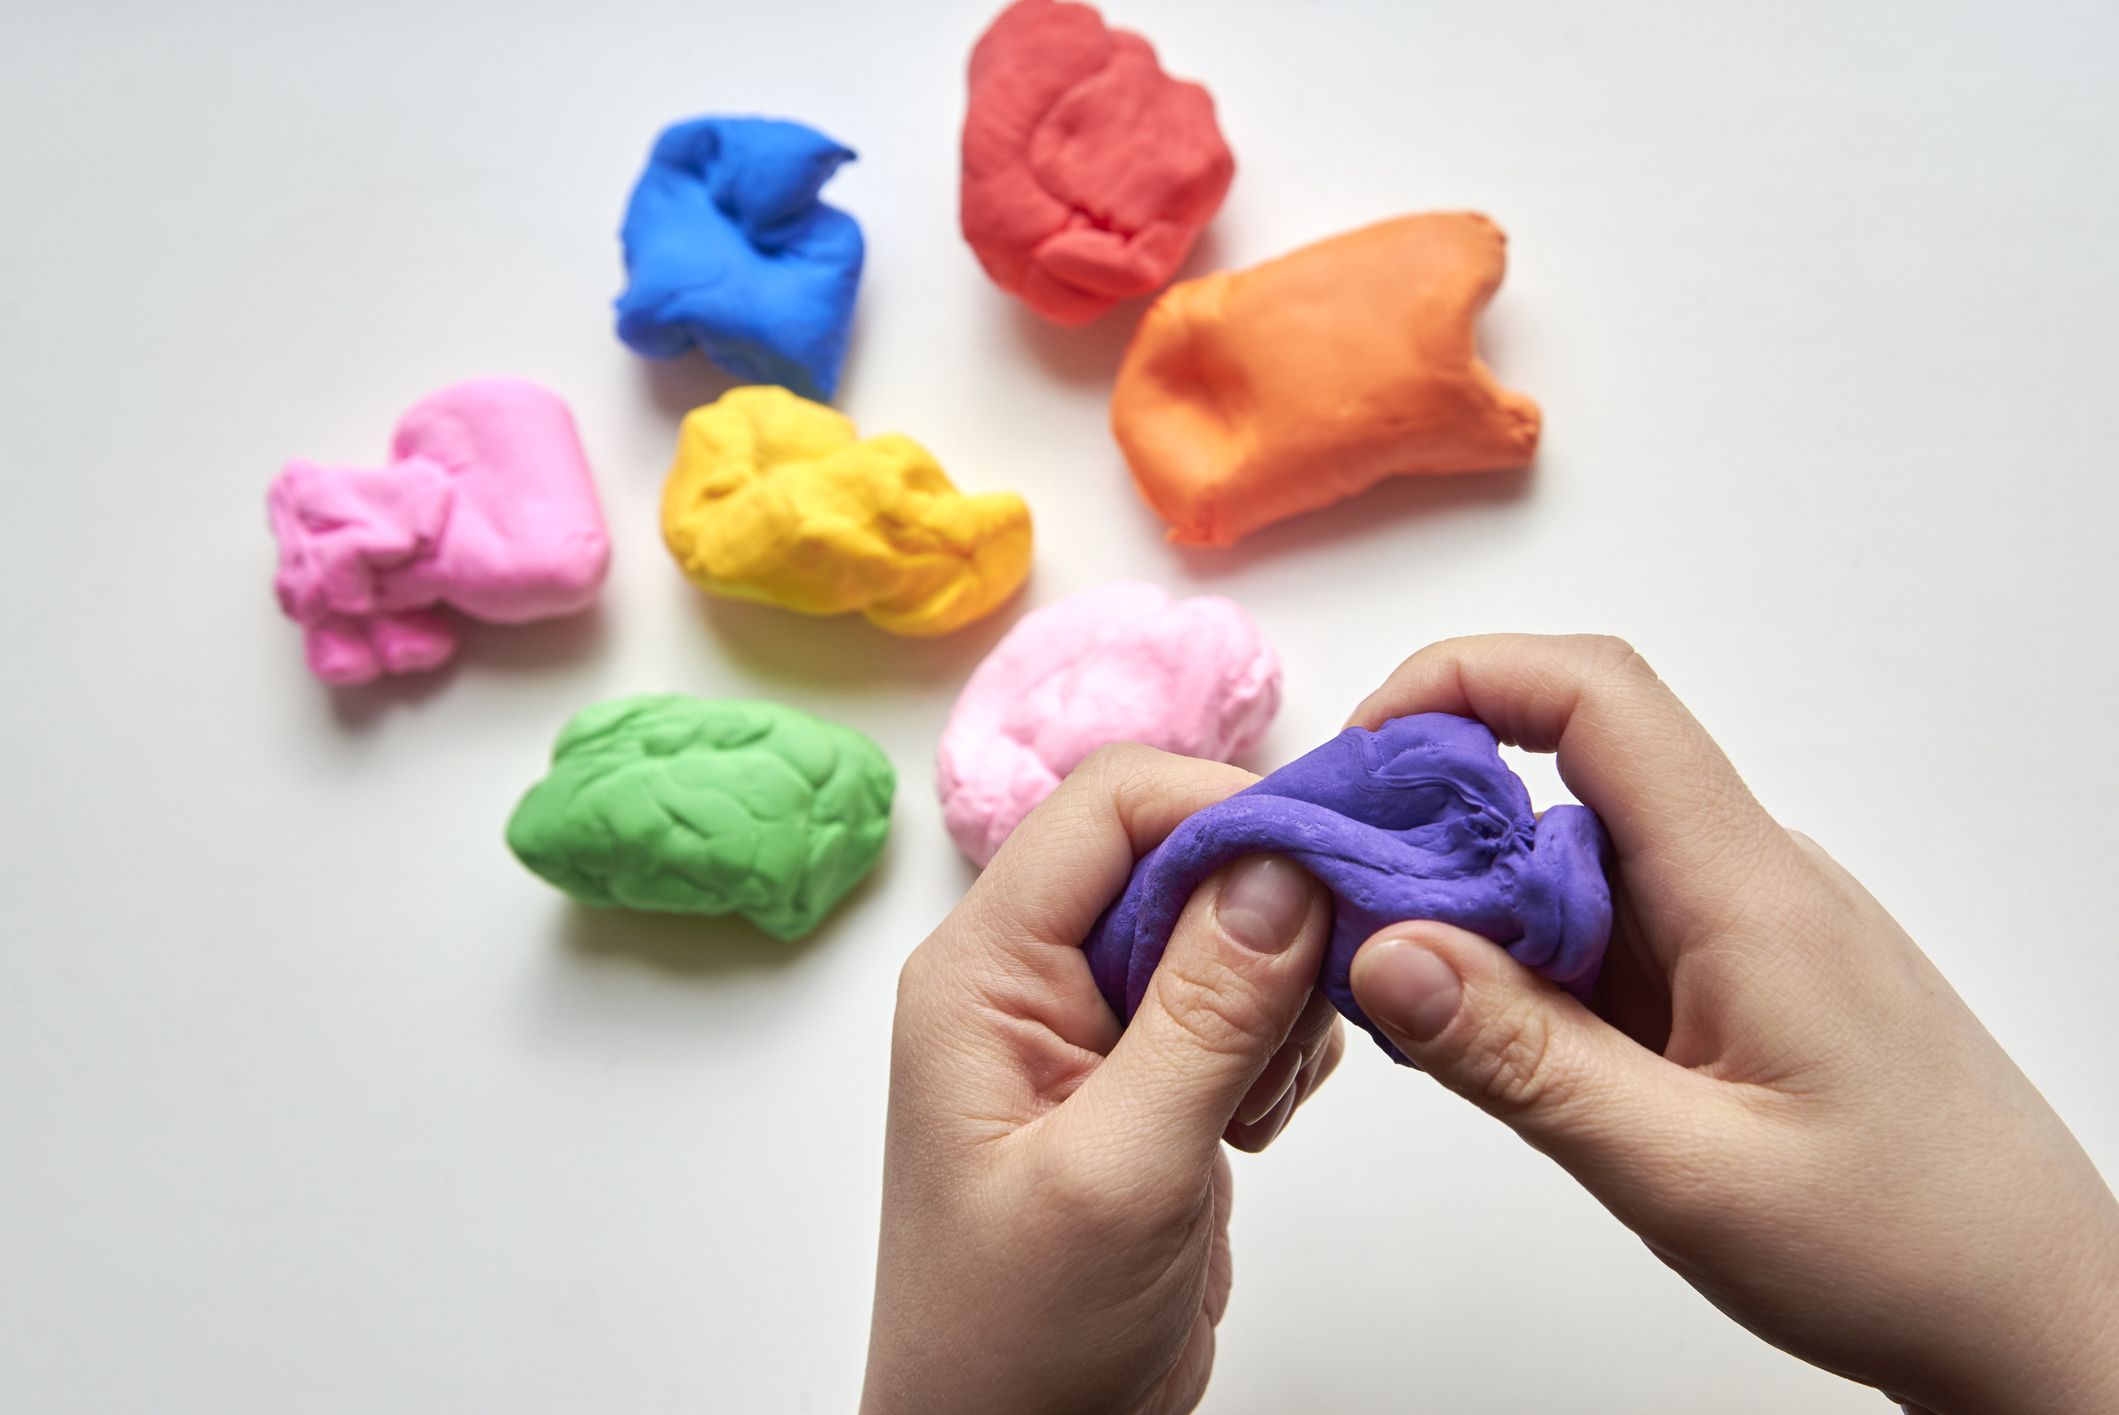 How to make playdough in 5 easy steps